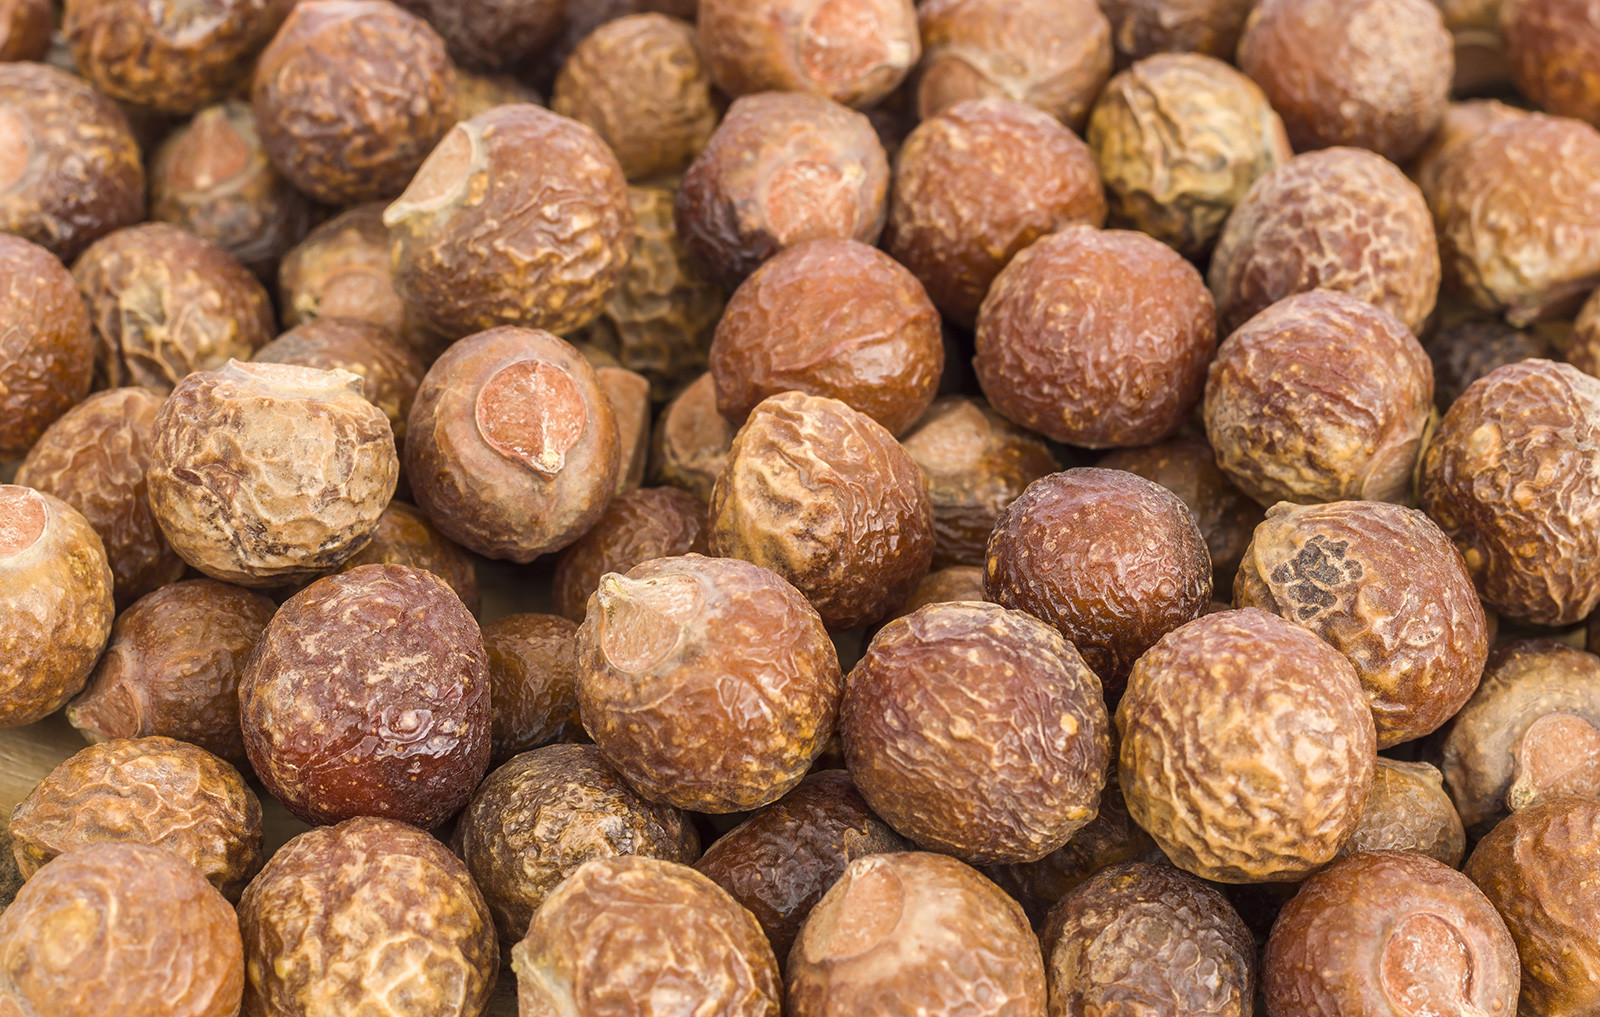 Soap-nuts in a pile (close-up).